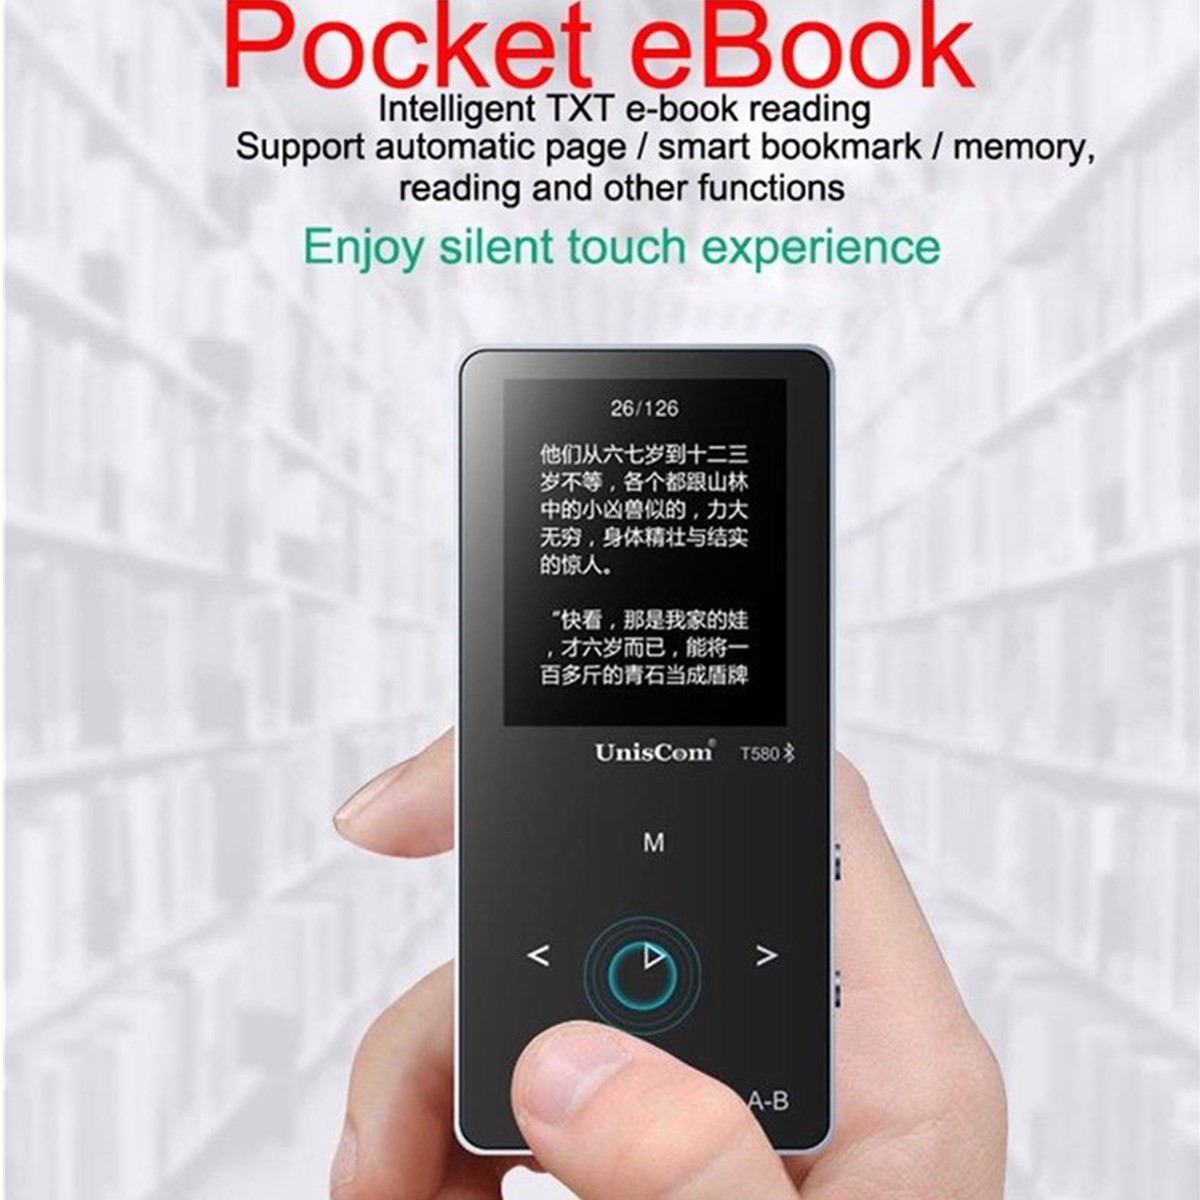 Uniscom 8G 1.8 Inch Screen bluetooth Lossless HIFI MP3 Music Player Support A-B Repeat Voice Record 7